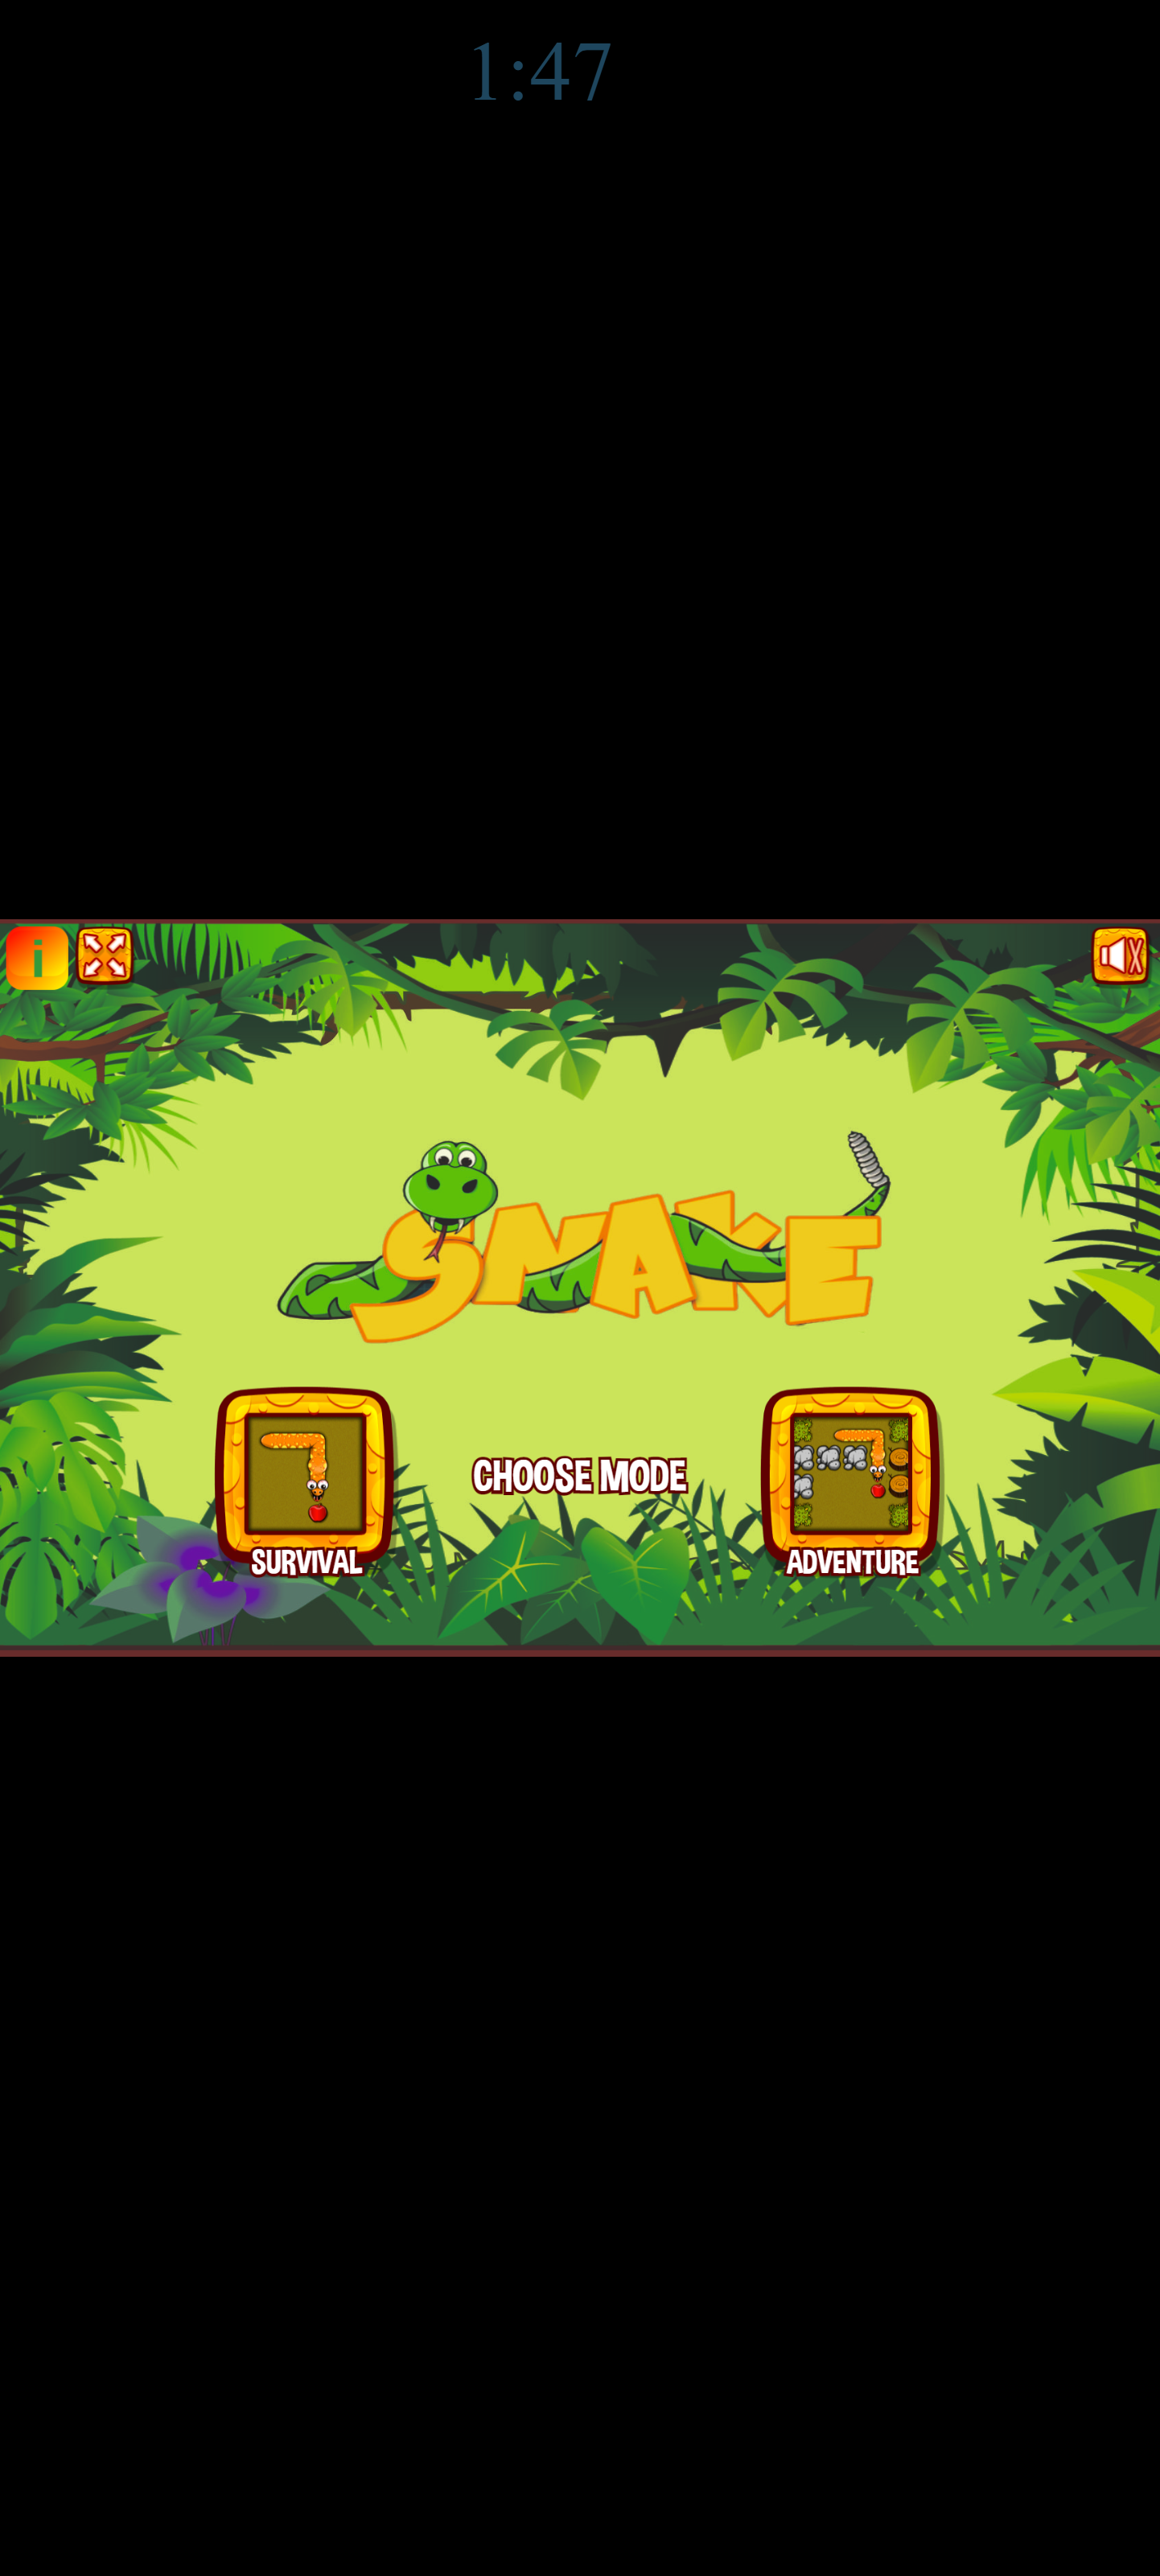 Snake game – Play and buy Snake game on Amandy games